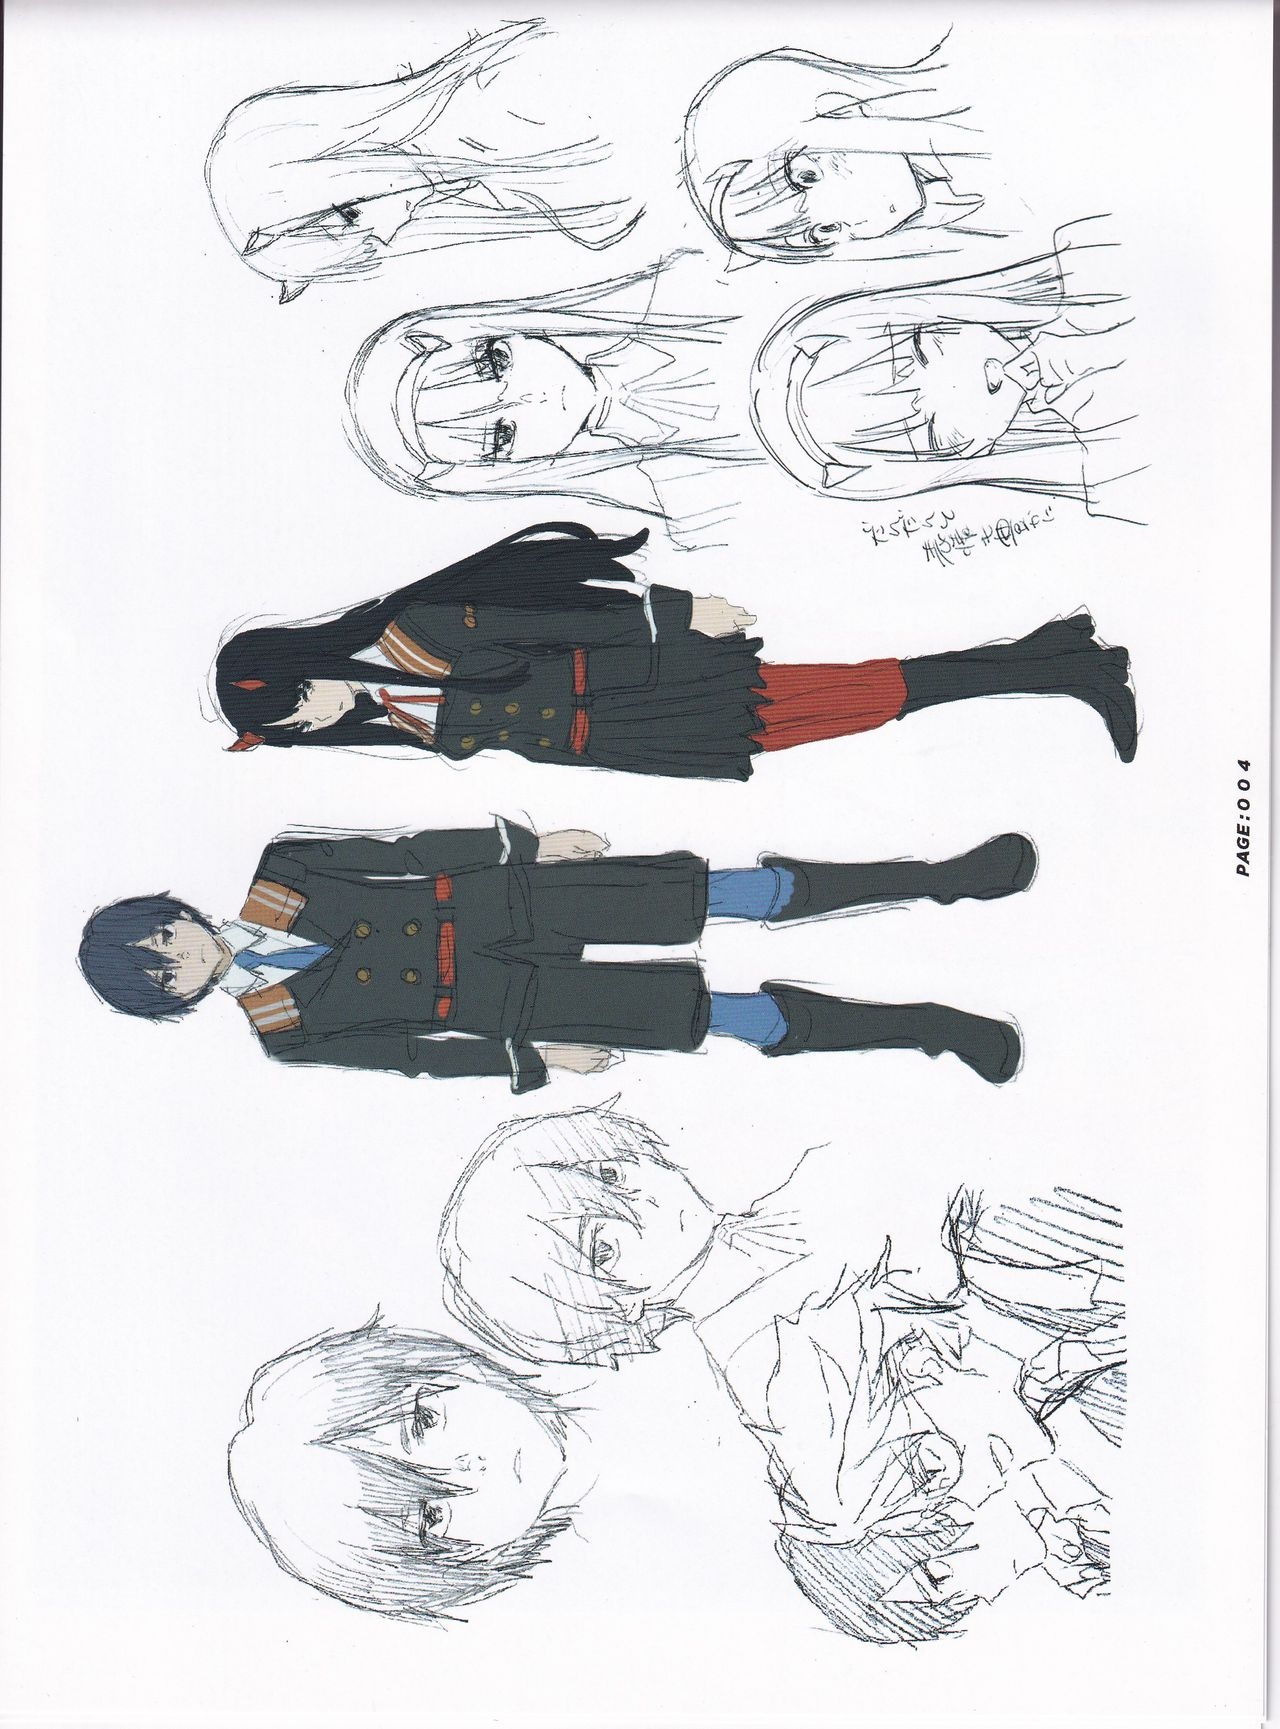 (C94) [Cemetery Hills High School (Various)] The Art of DiF Vol. X (DARLING in the FRANXX) 4